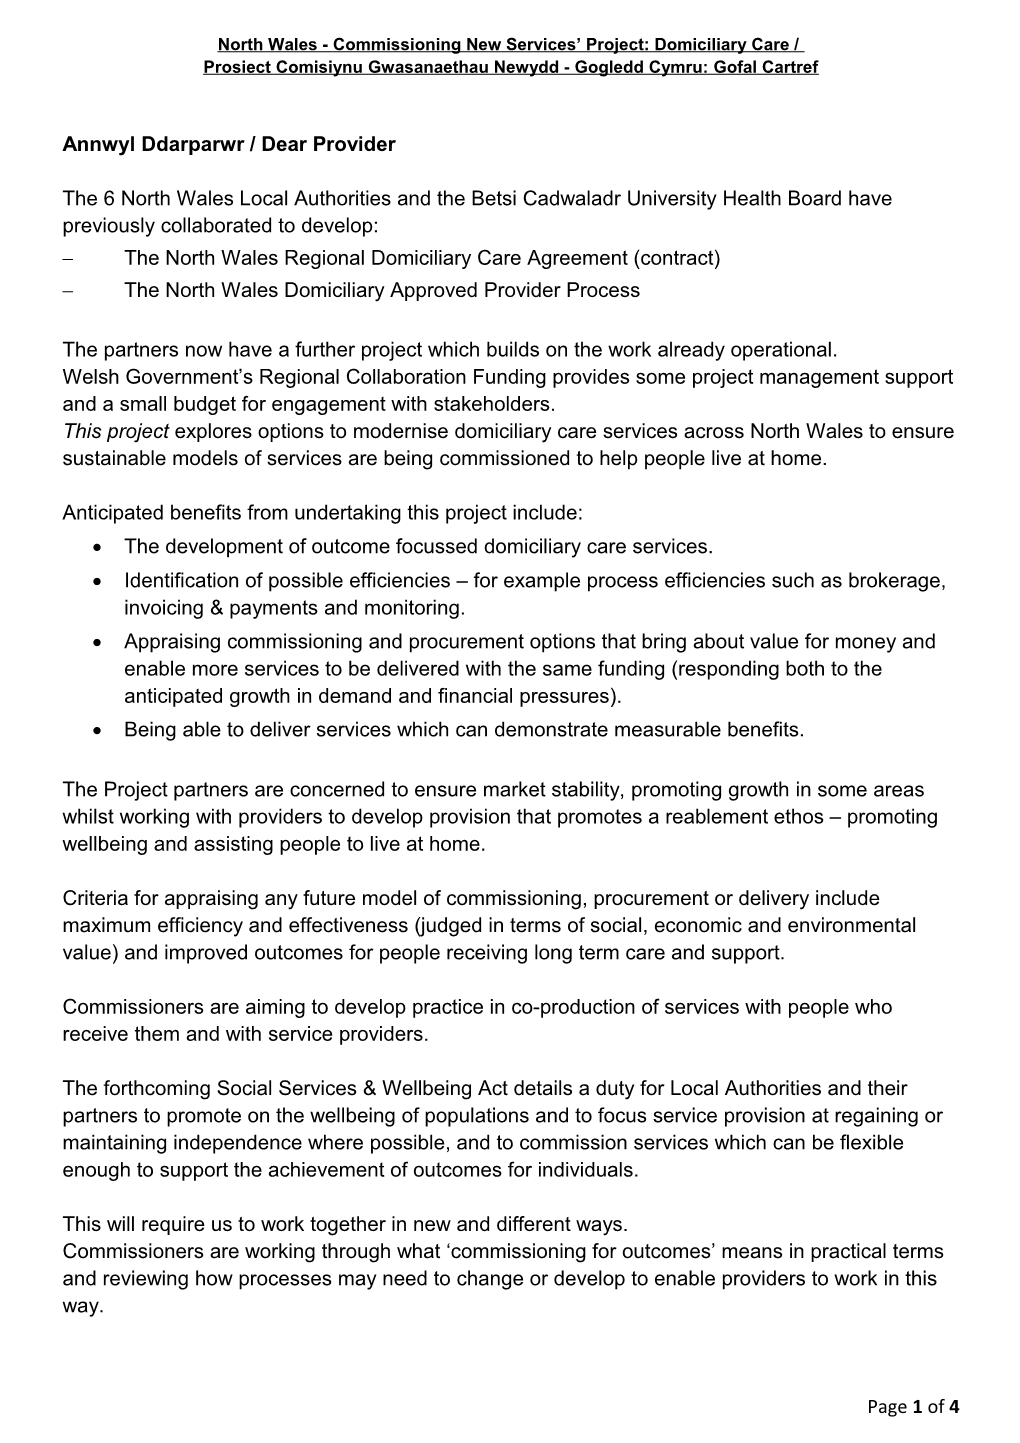 North Wales - Commissioning New Services Project: Domiciliary Care